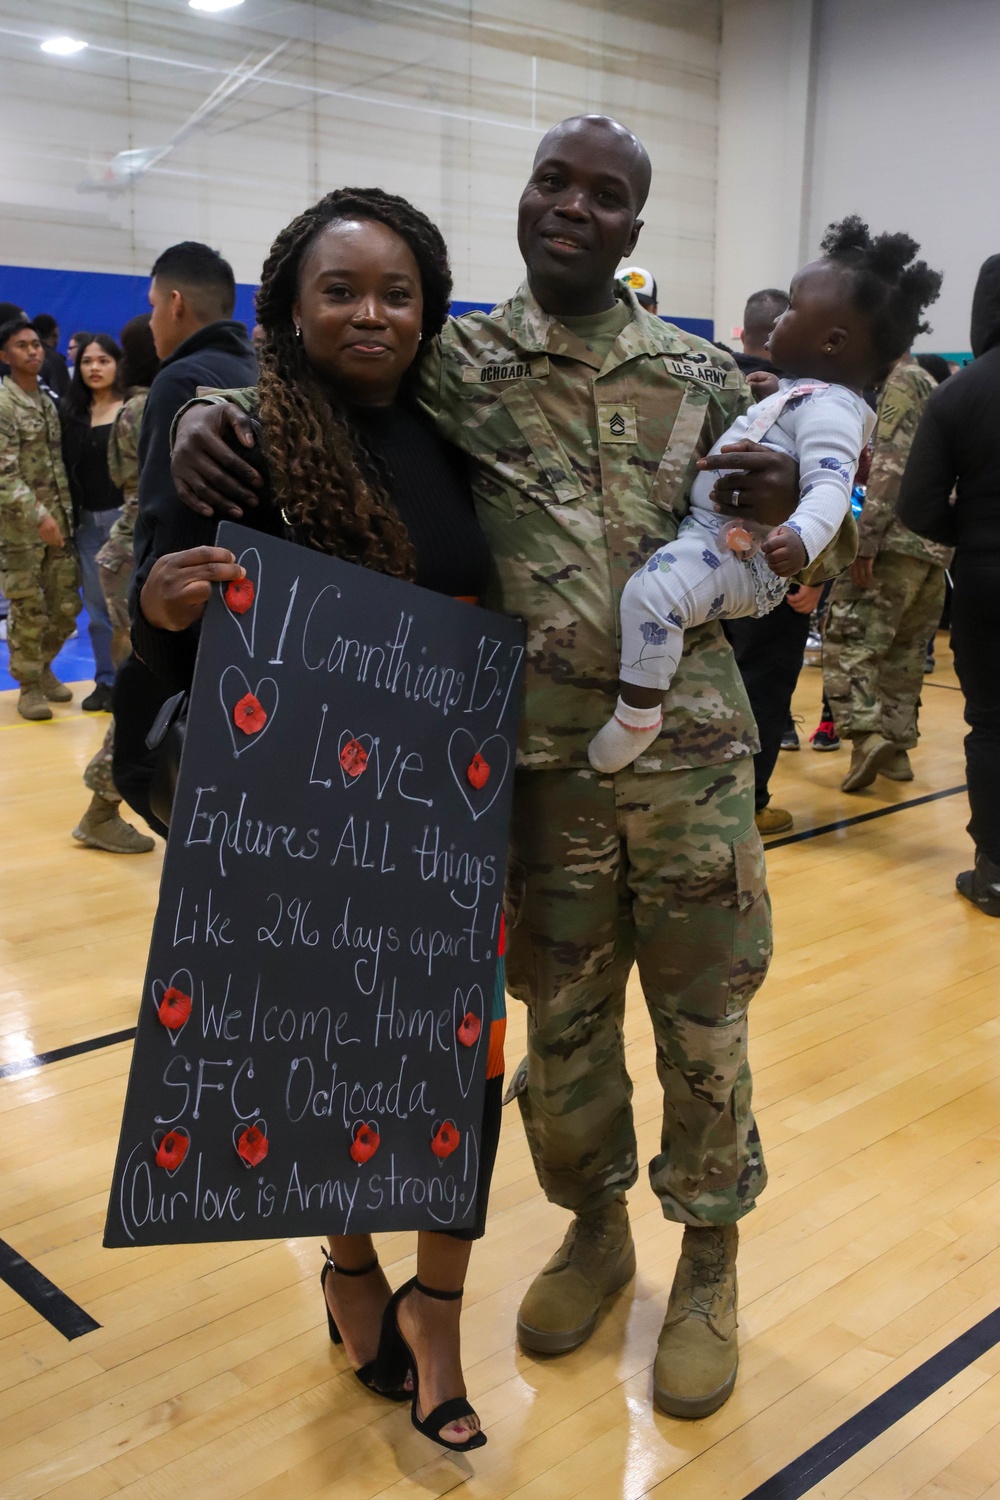 3rd Infantry Division Soldiers at Redeployment Ceremony Return Home